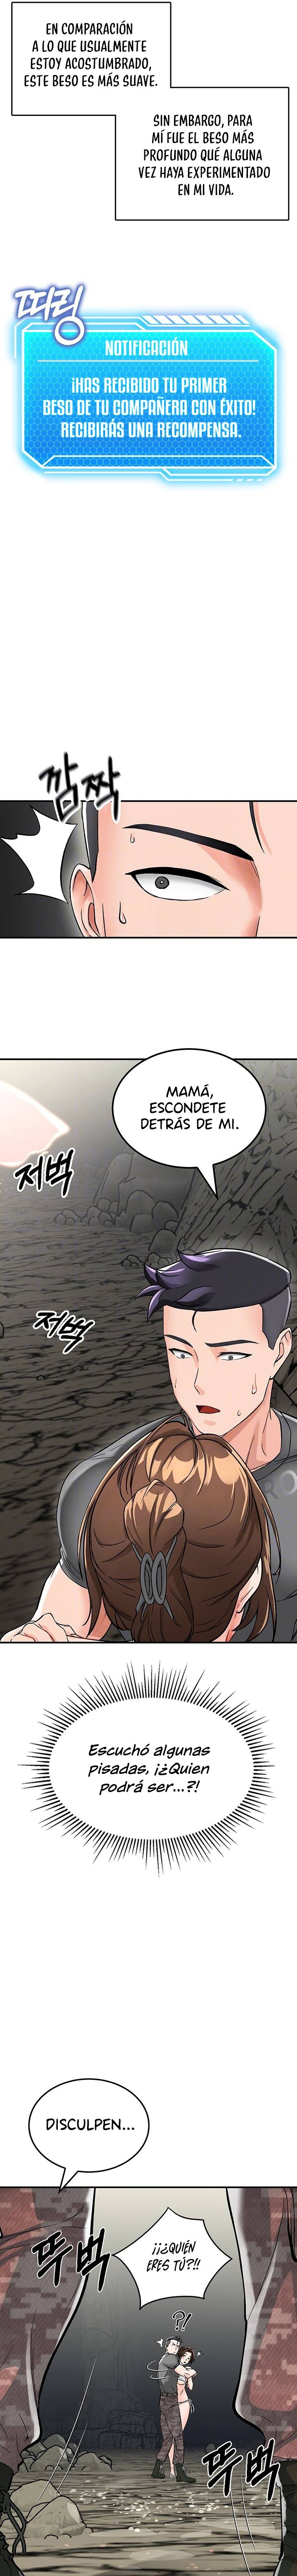 mother-son-island-survival-raw-chap-3-4